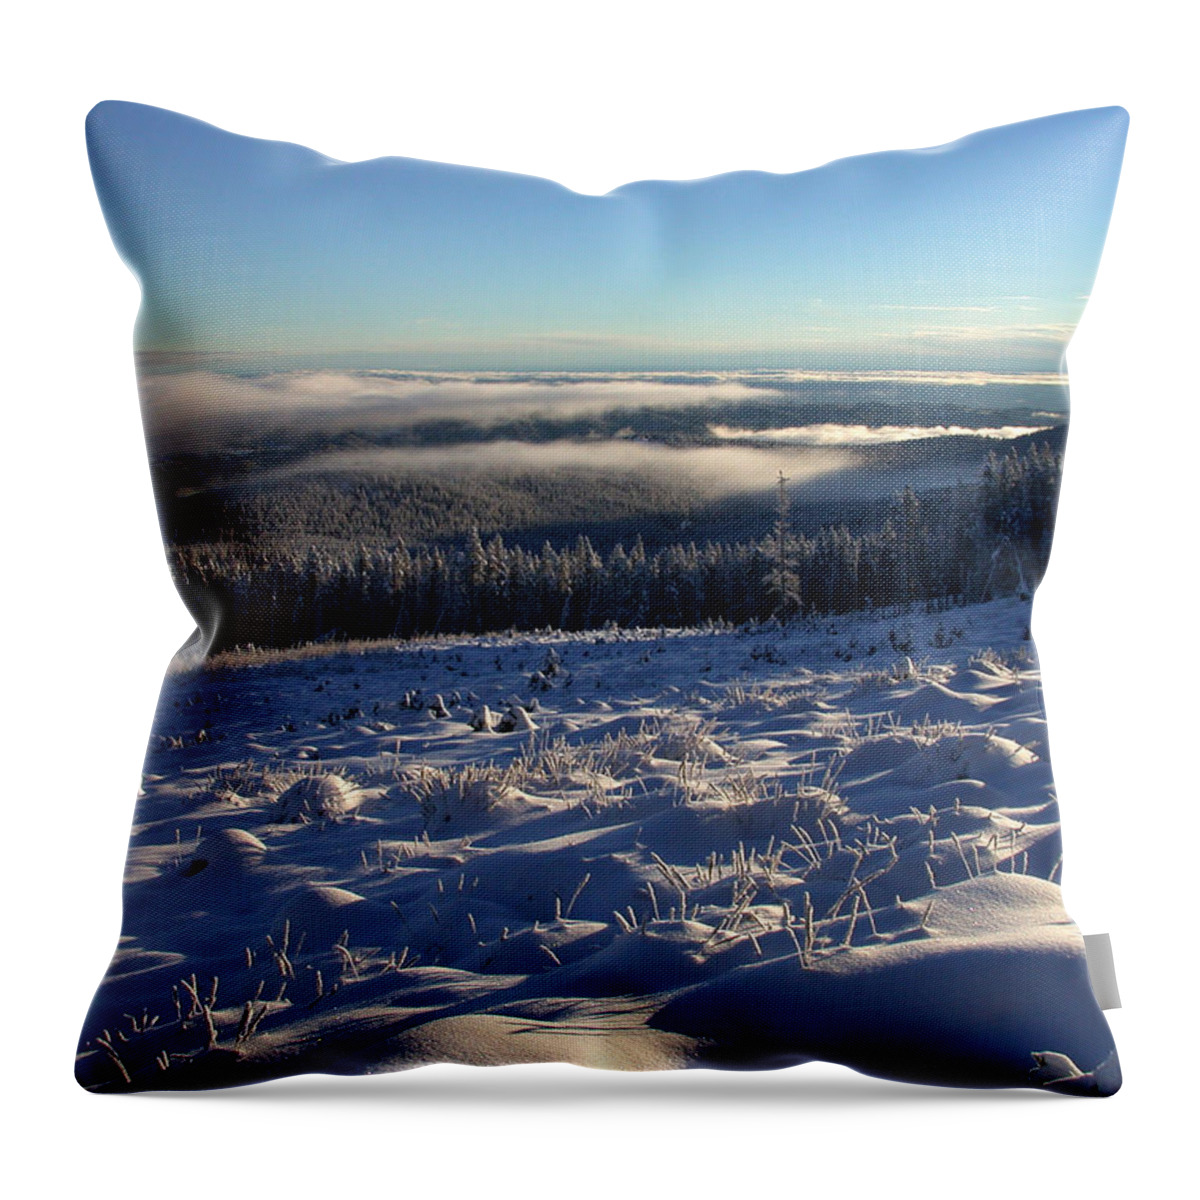 Clouds Throw Pillow featuring the photograph Above The Clouds by Shane Bechler